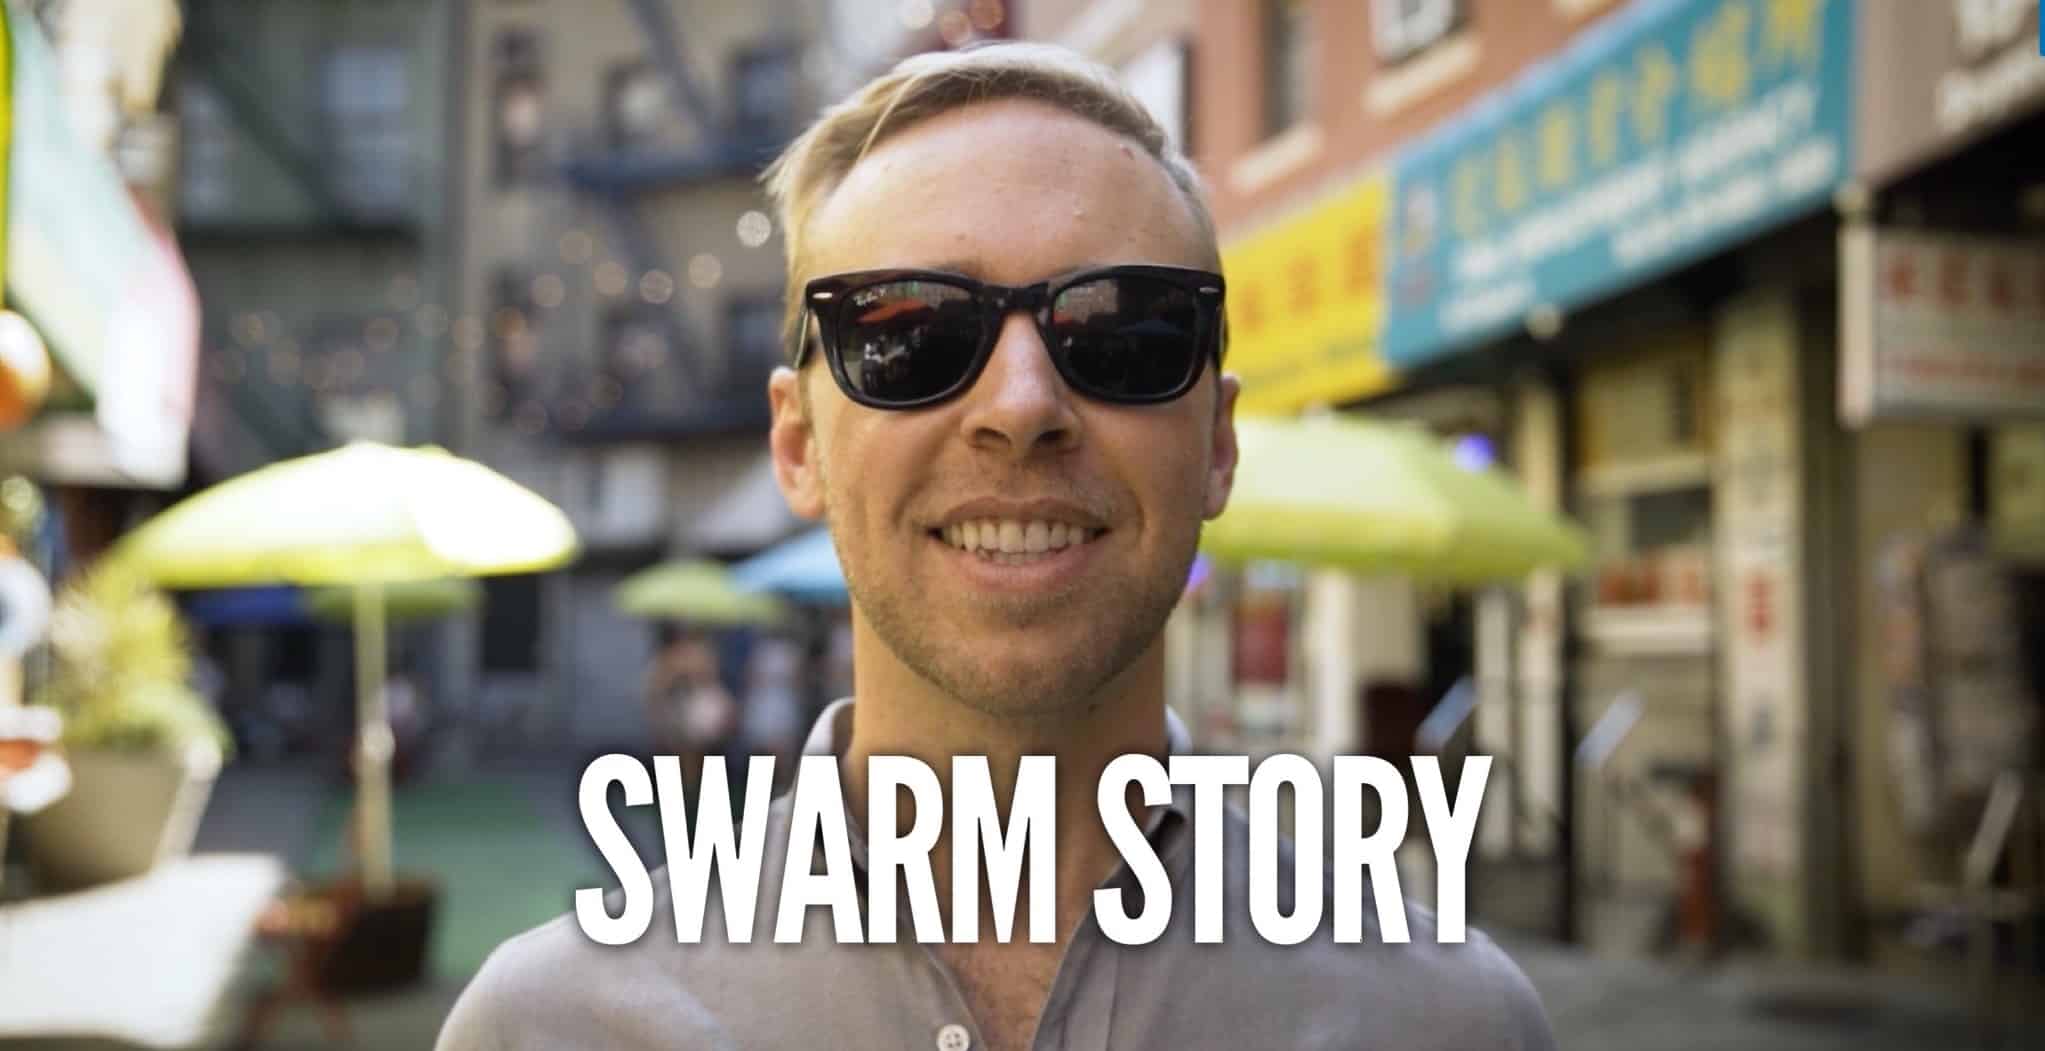 Swarm Story Interview with Nick Gray